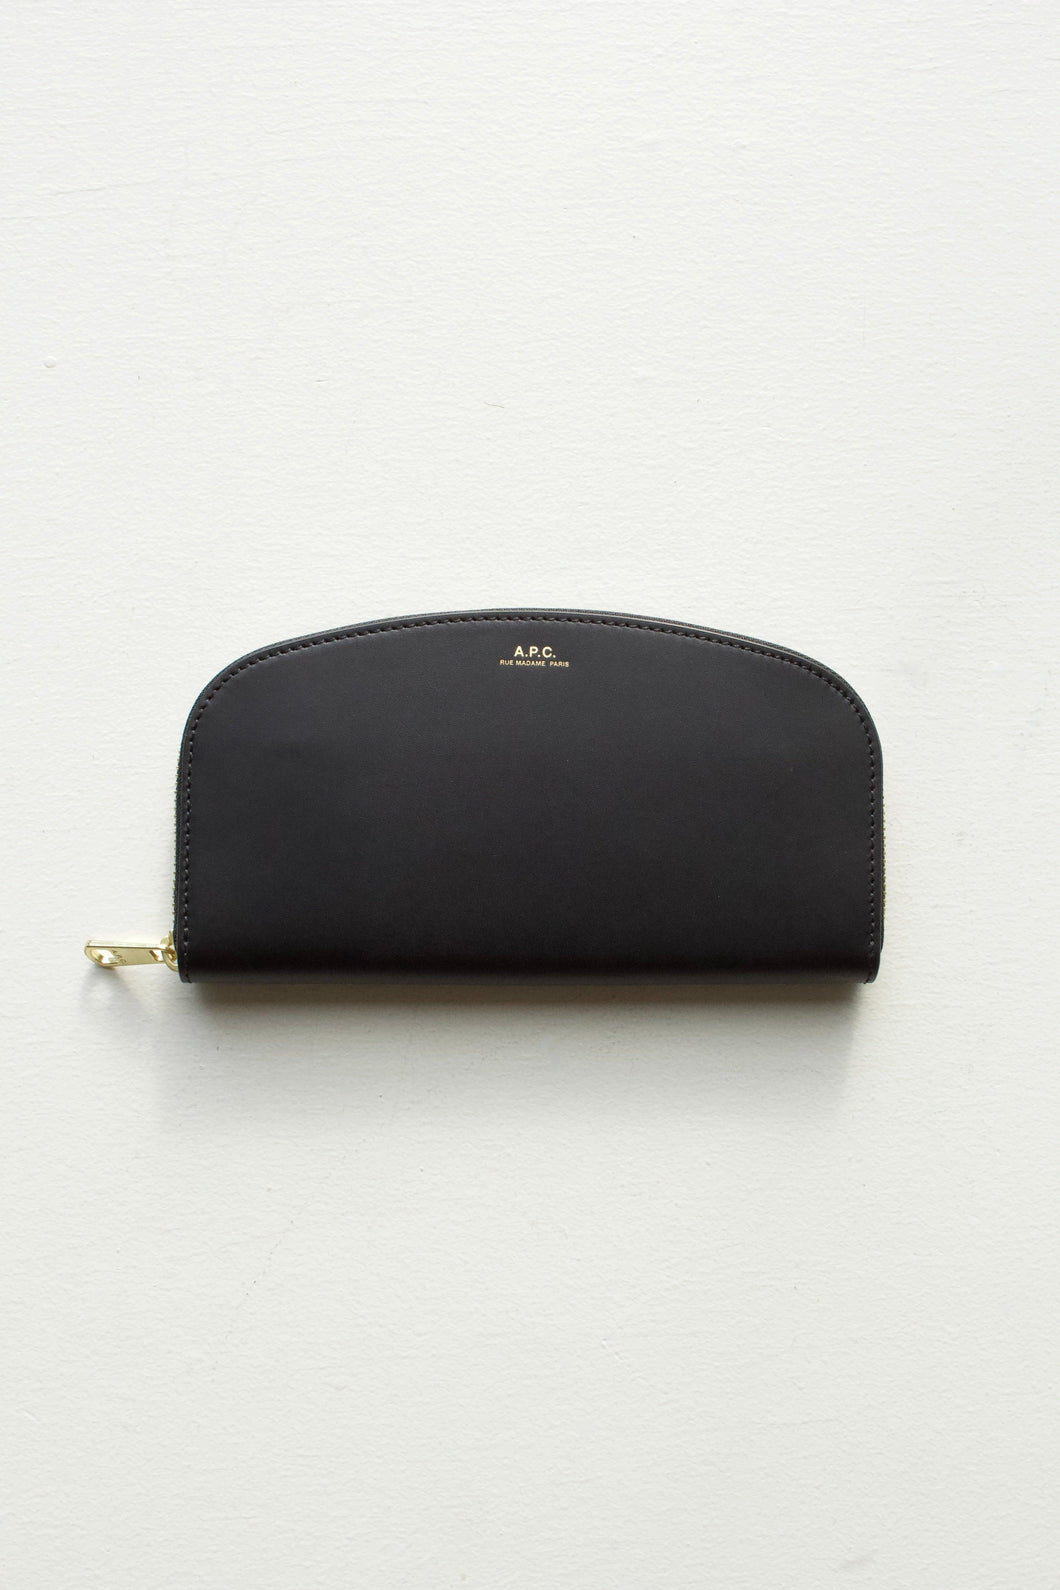 true onyx black continental-style wallet. The A.P.C Demi Lune Wallet